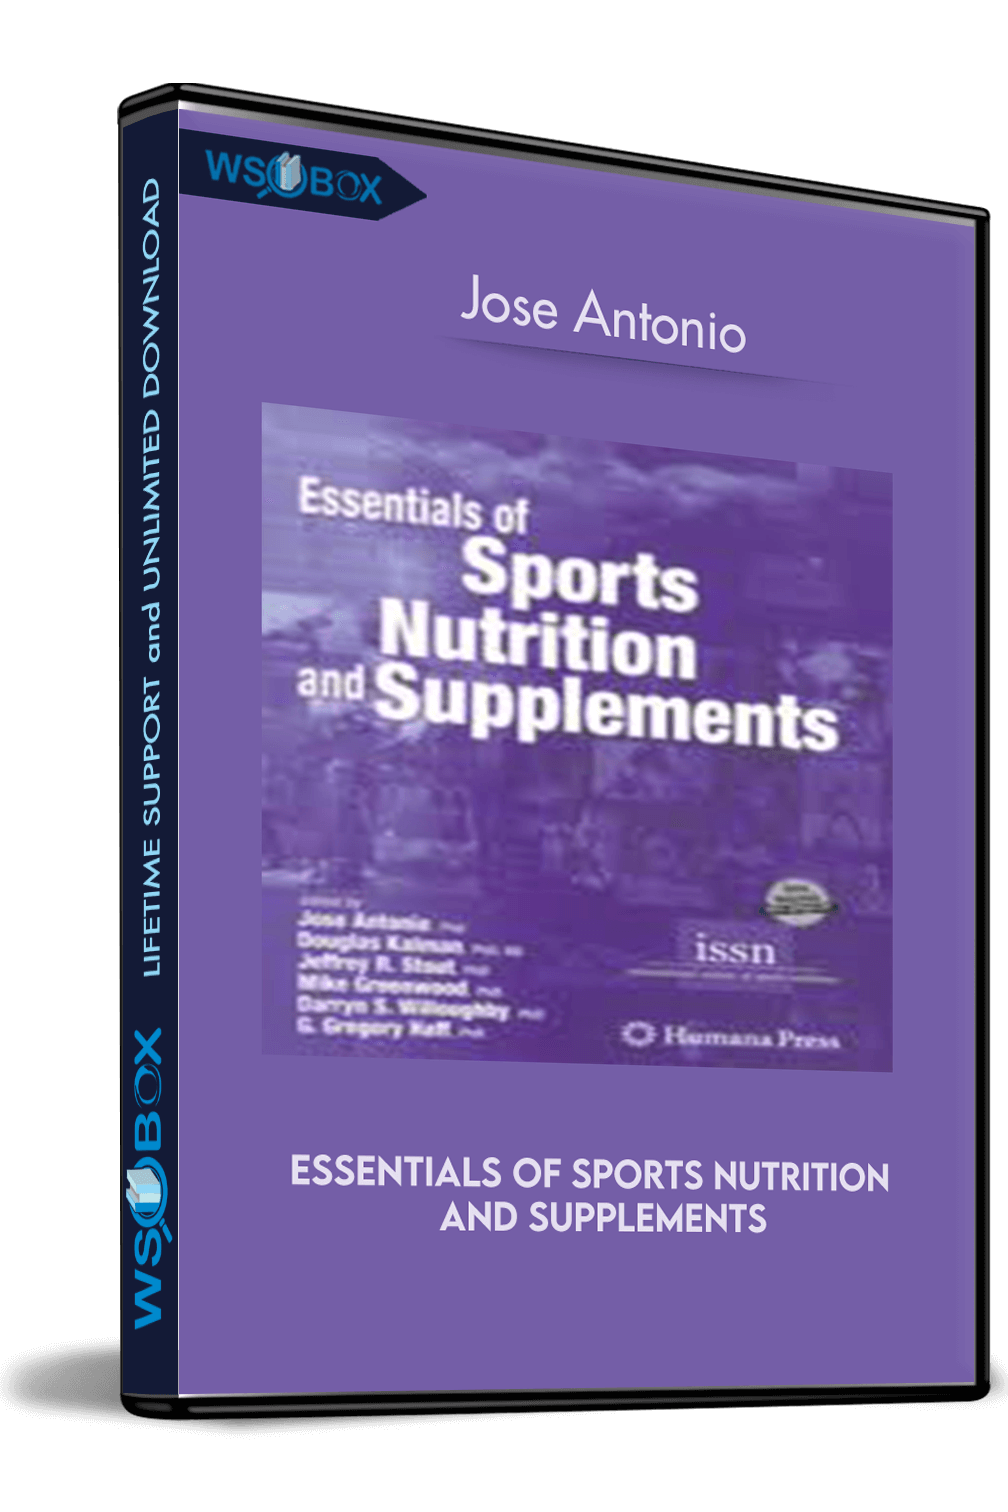 Essentials of Sports Nutrition and Supplements – Jose Antonio